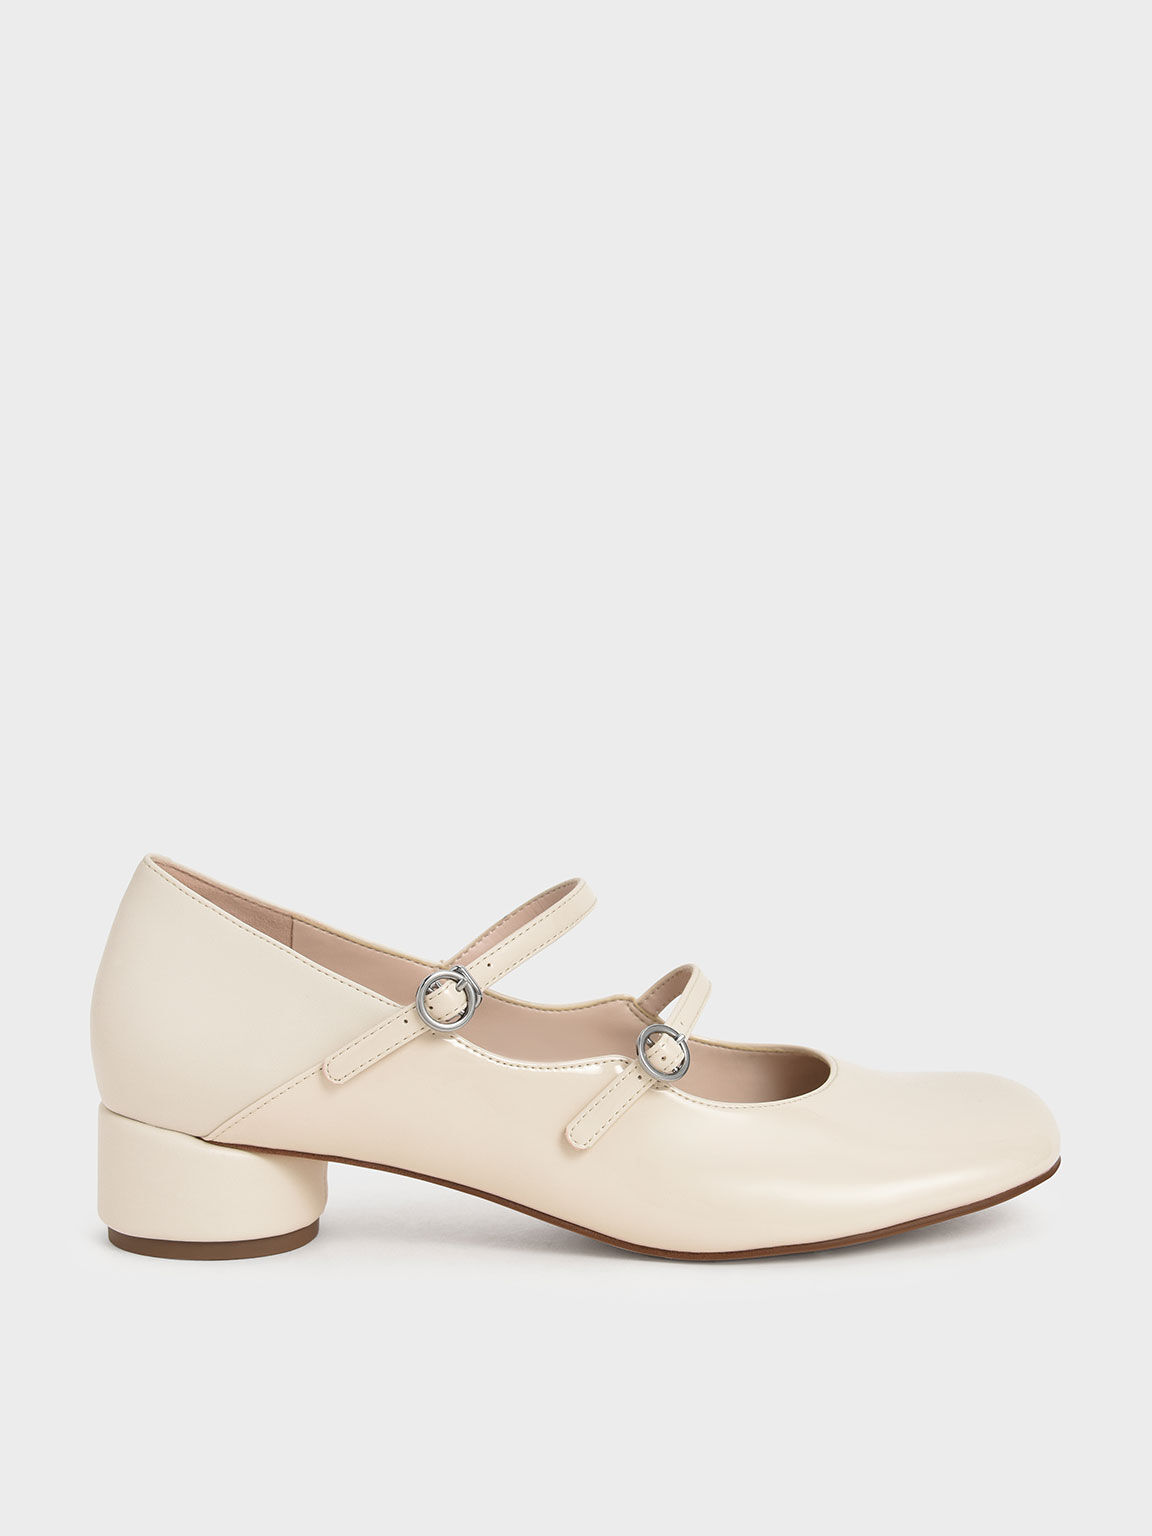 Patent Double-Strap Mary Janes, Chalk, hi-res